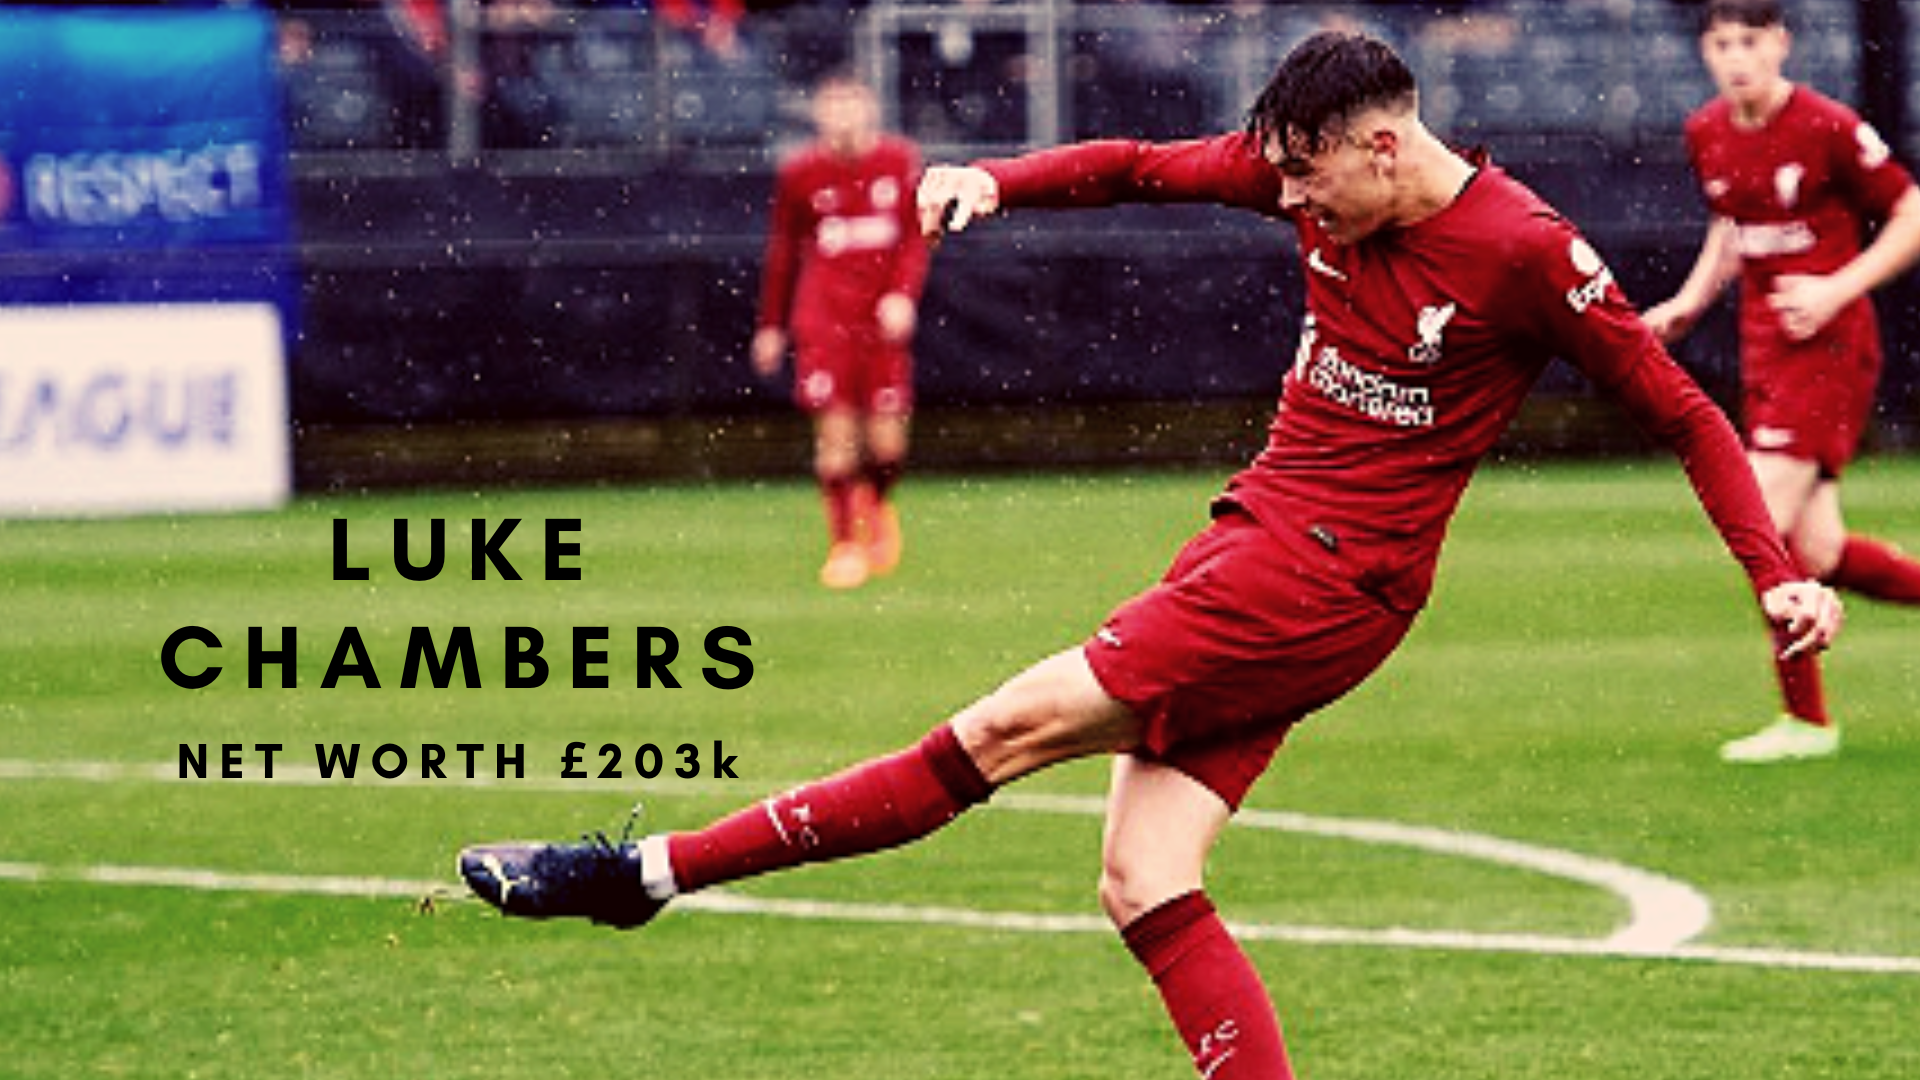 Luke Chambers is an English professional footballer who plays as a Left-back for Liverpool. (Credits: @lukechambers.04 Instagram)